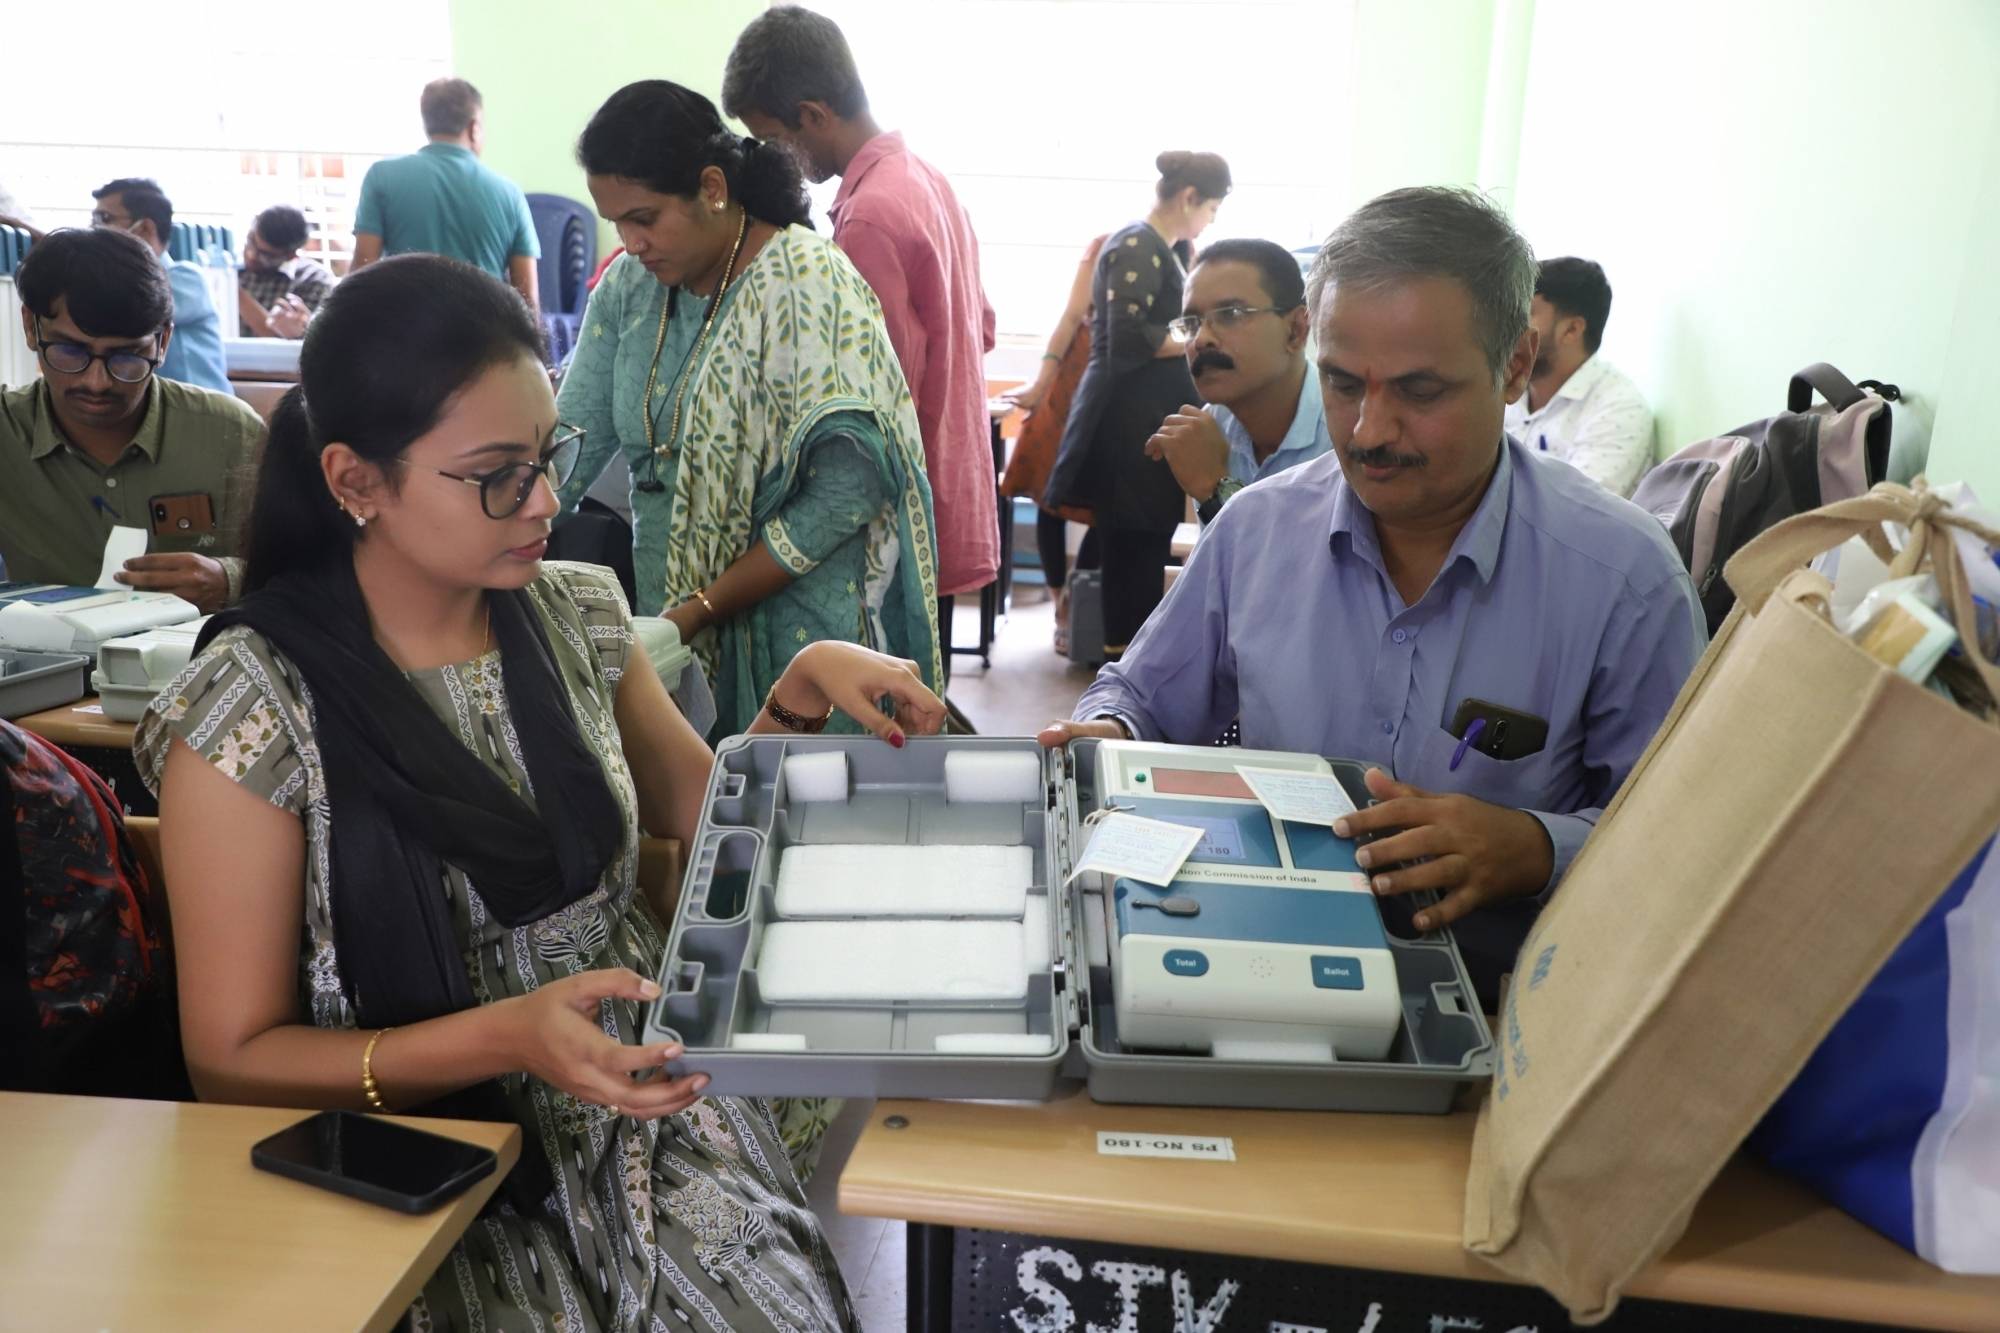 Bengaluru: Polling officials collect EVMs and other voting materials ahead of the Karnataka Assembly elections, at Veterinary College distribution centre in Bengaluru, Tuesday, May 9, 2023 (Photo:IANS)